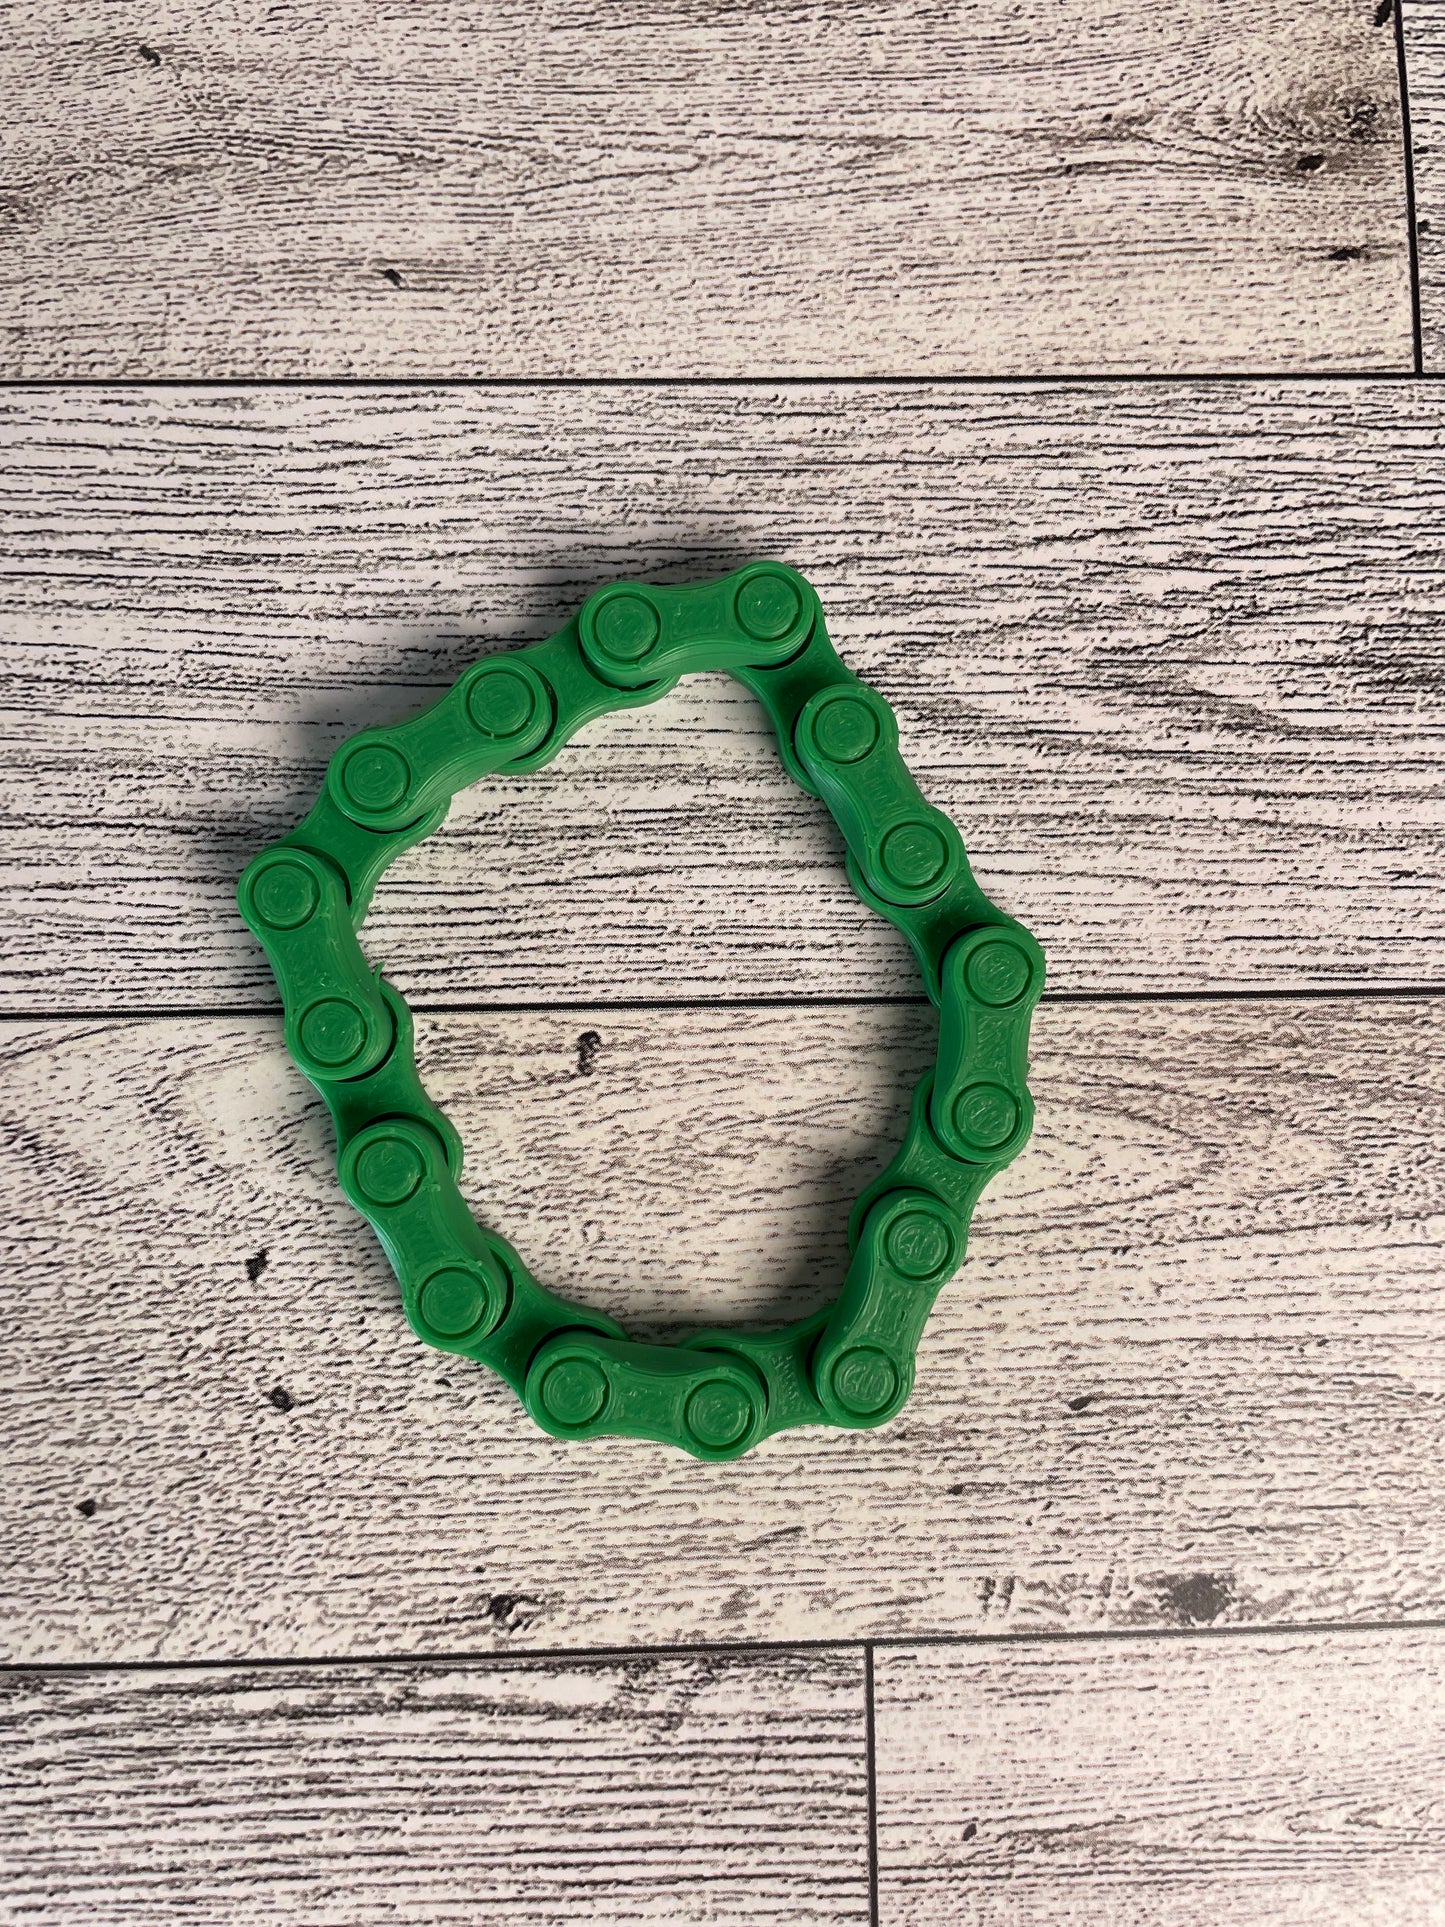 A green chain link on a wood backdrop. The chain is arranged in a circle shape and there are eight links.